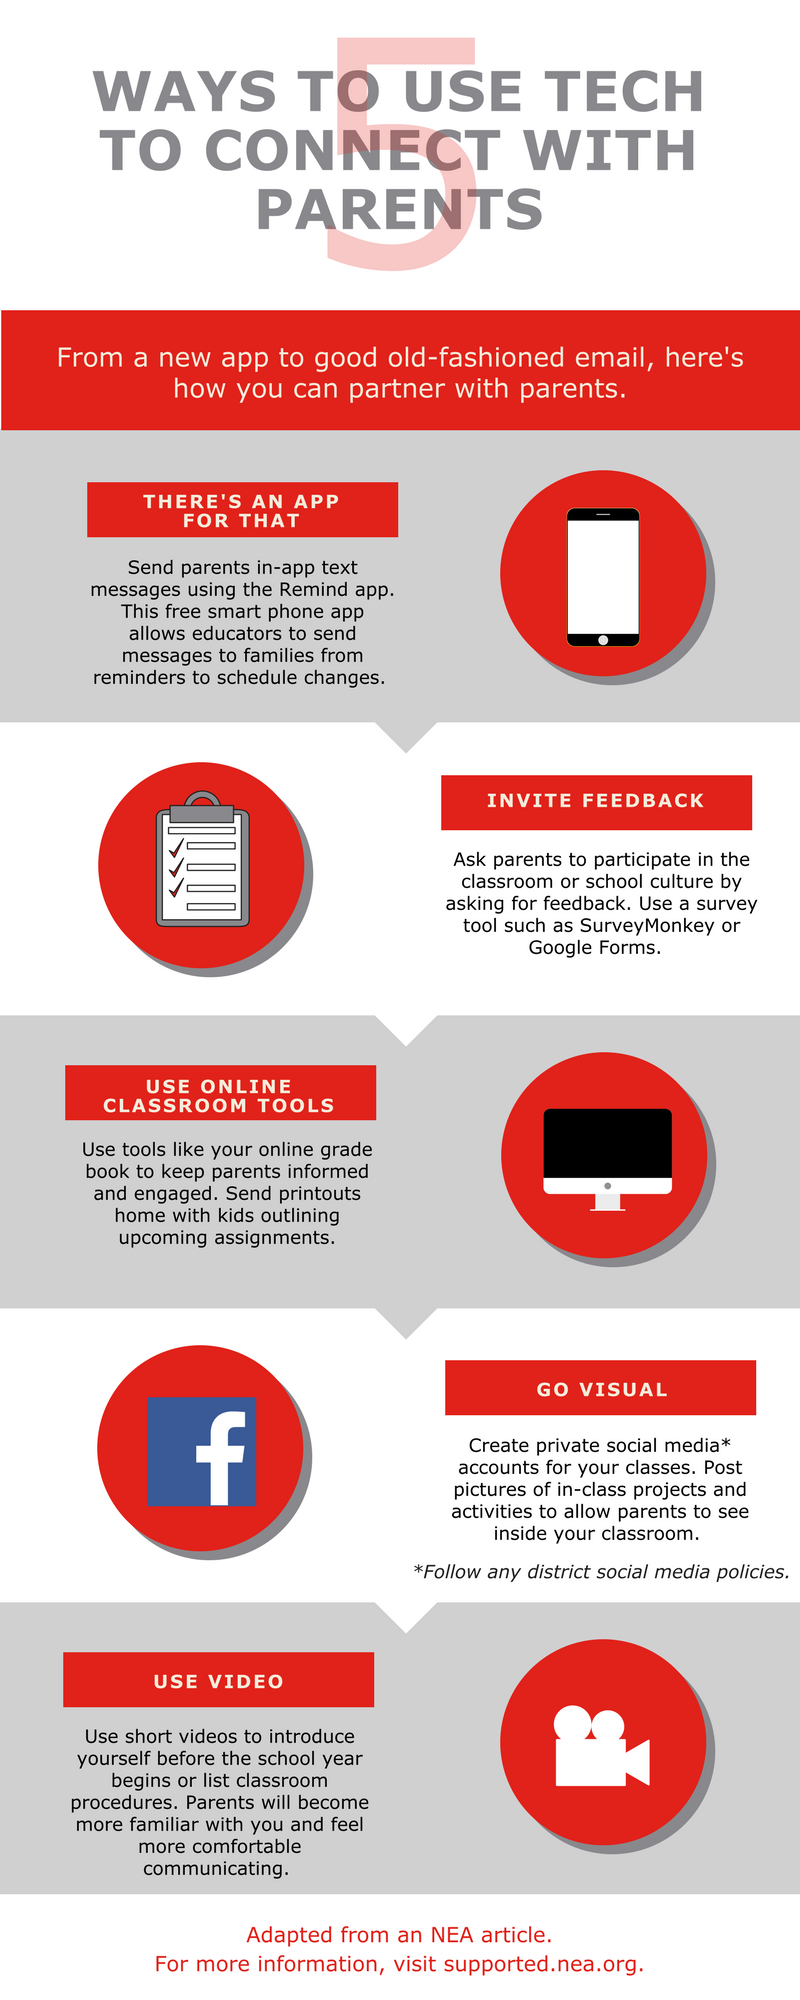 5 Ways to Use Tech to Connect with Parents